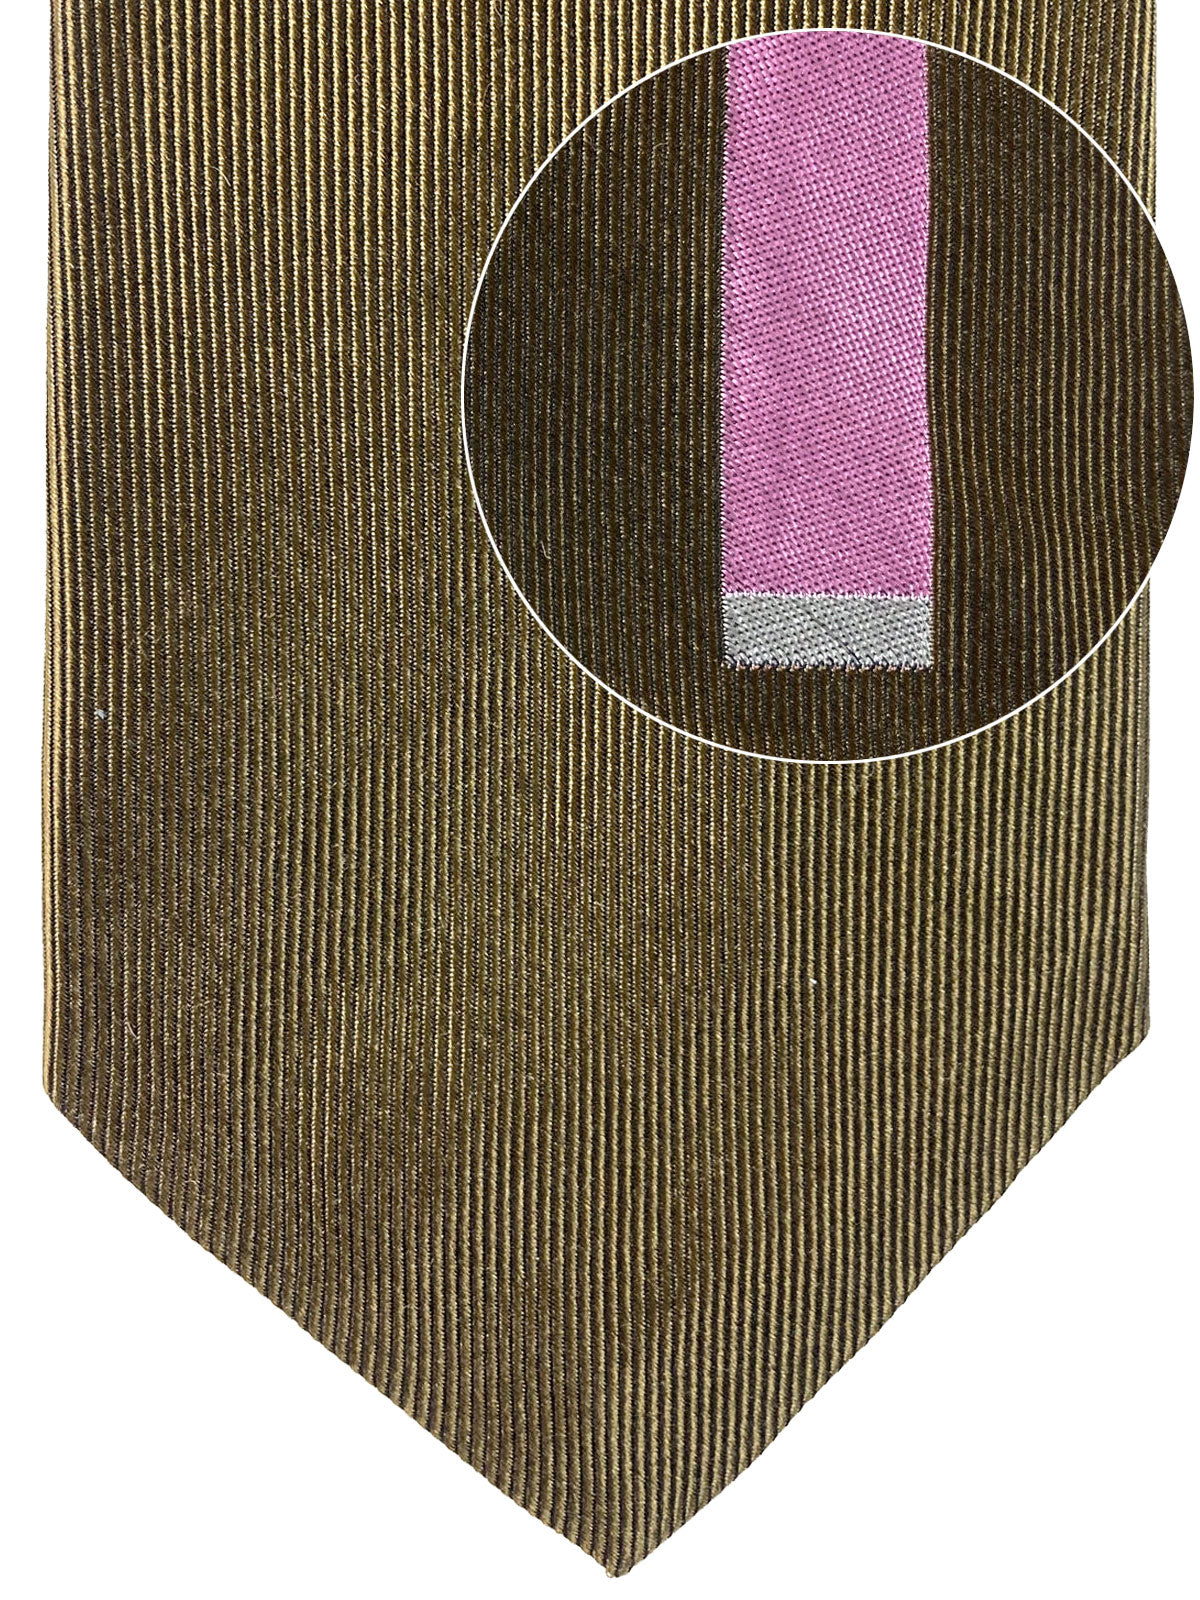 Gene Meyer Tie Taupe Lilac Stripe Design - Hand Made in Italy